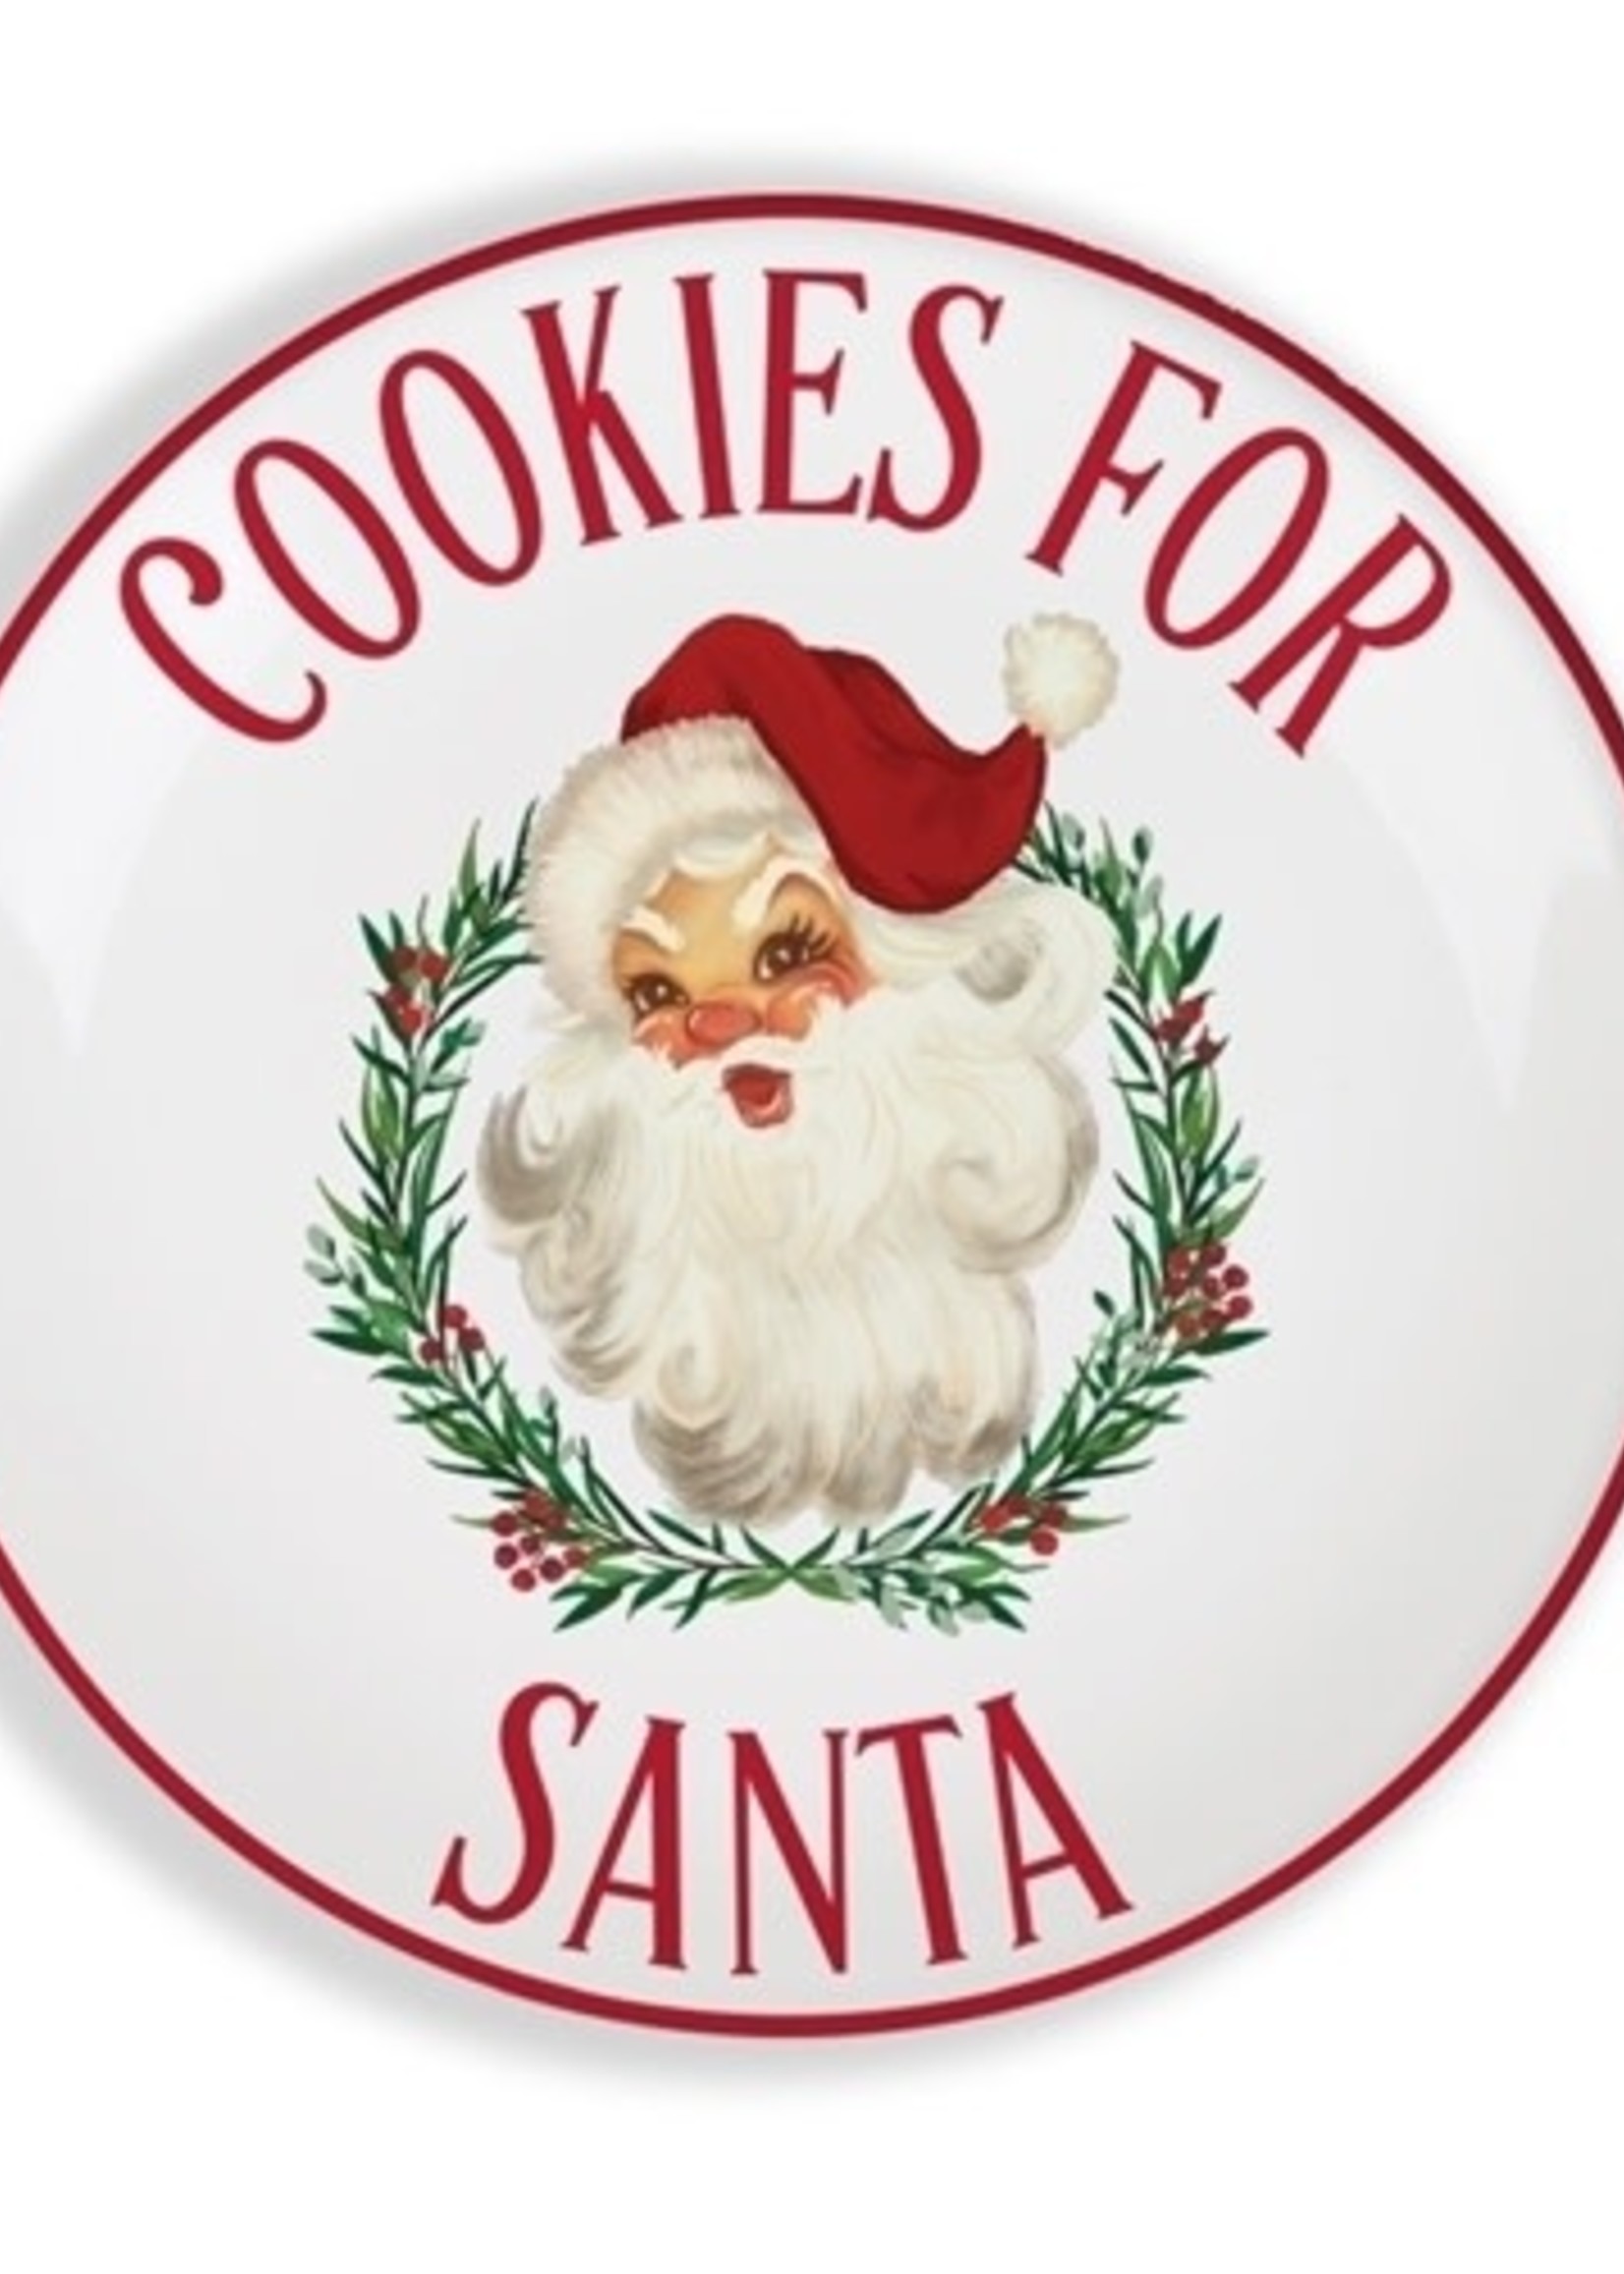 Mary Square Mary Square - Cookies for Santa platter